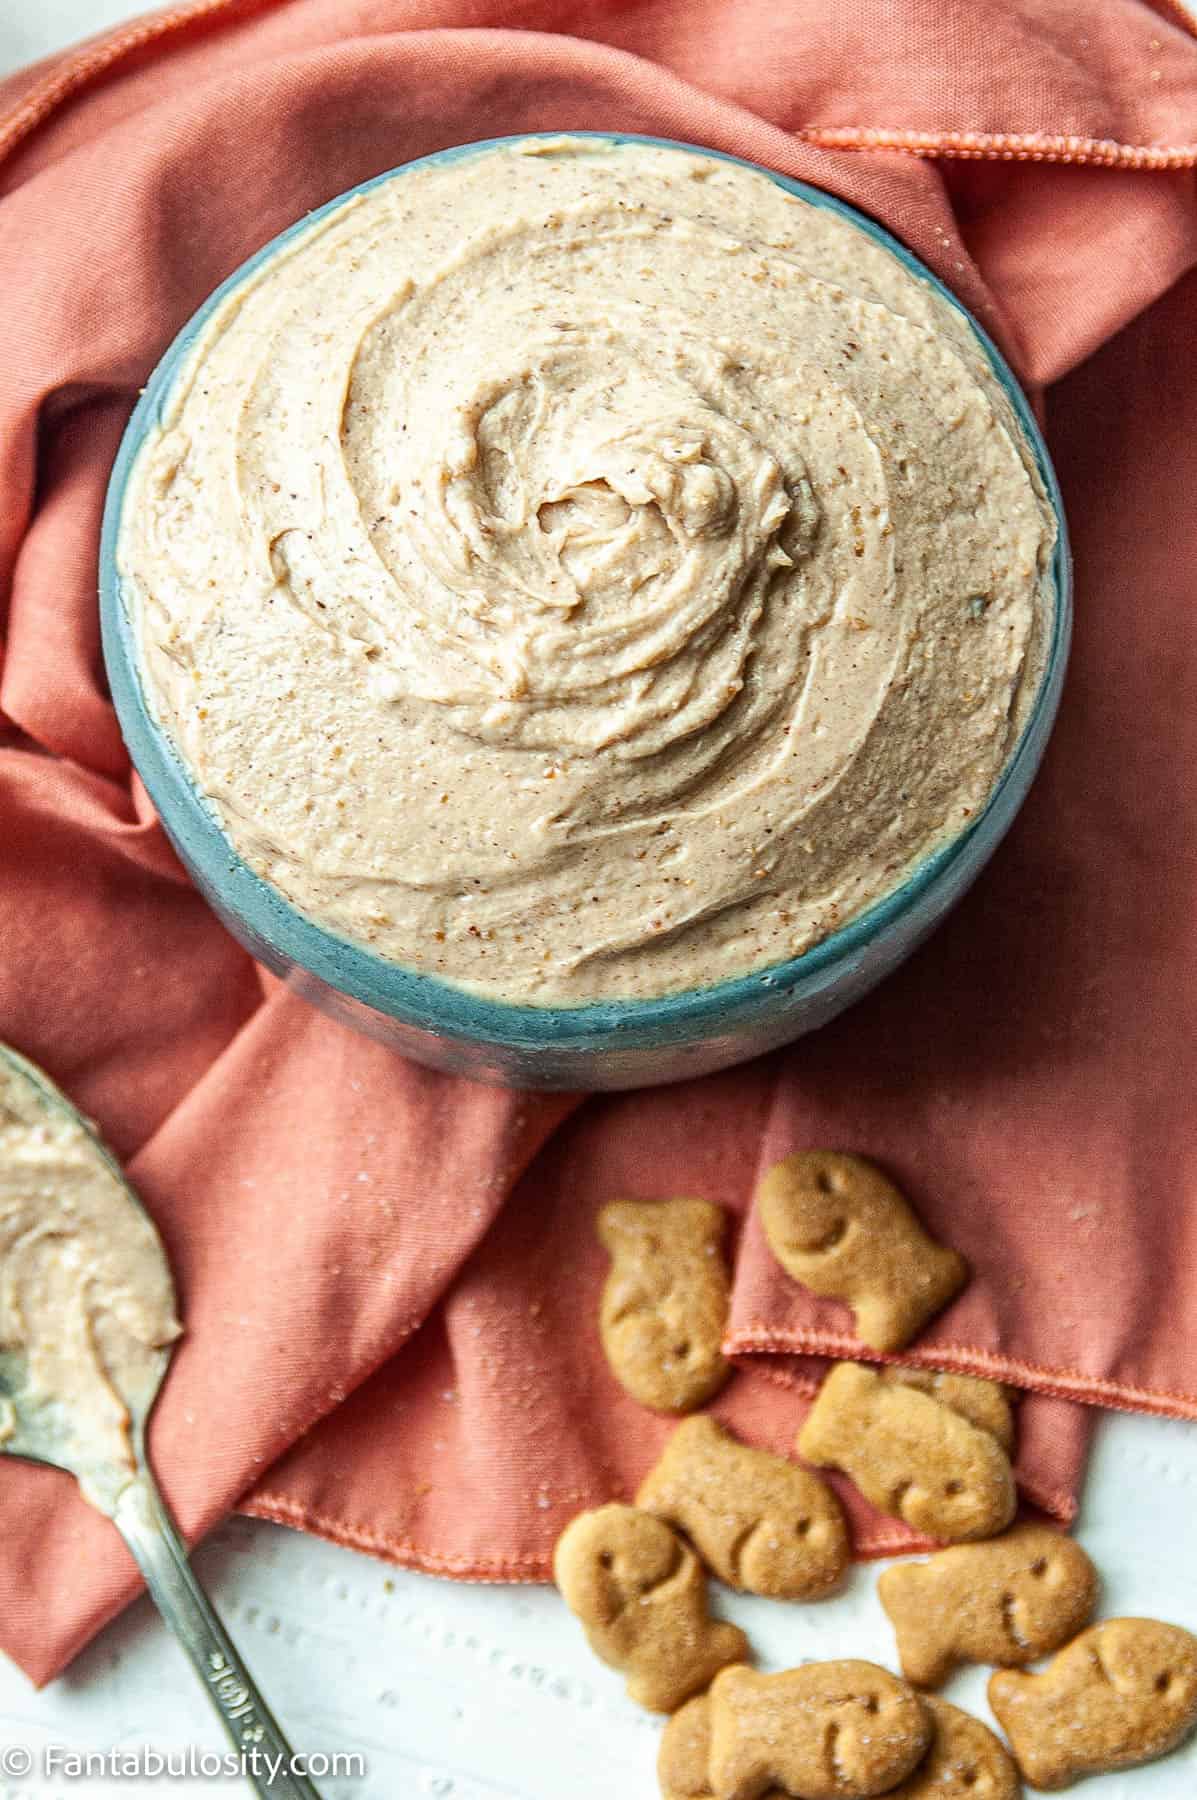 Peanut Butter Yogurt Dip is displayed in a serving bowl with a spoon to the left and graham crackers on the right